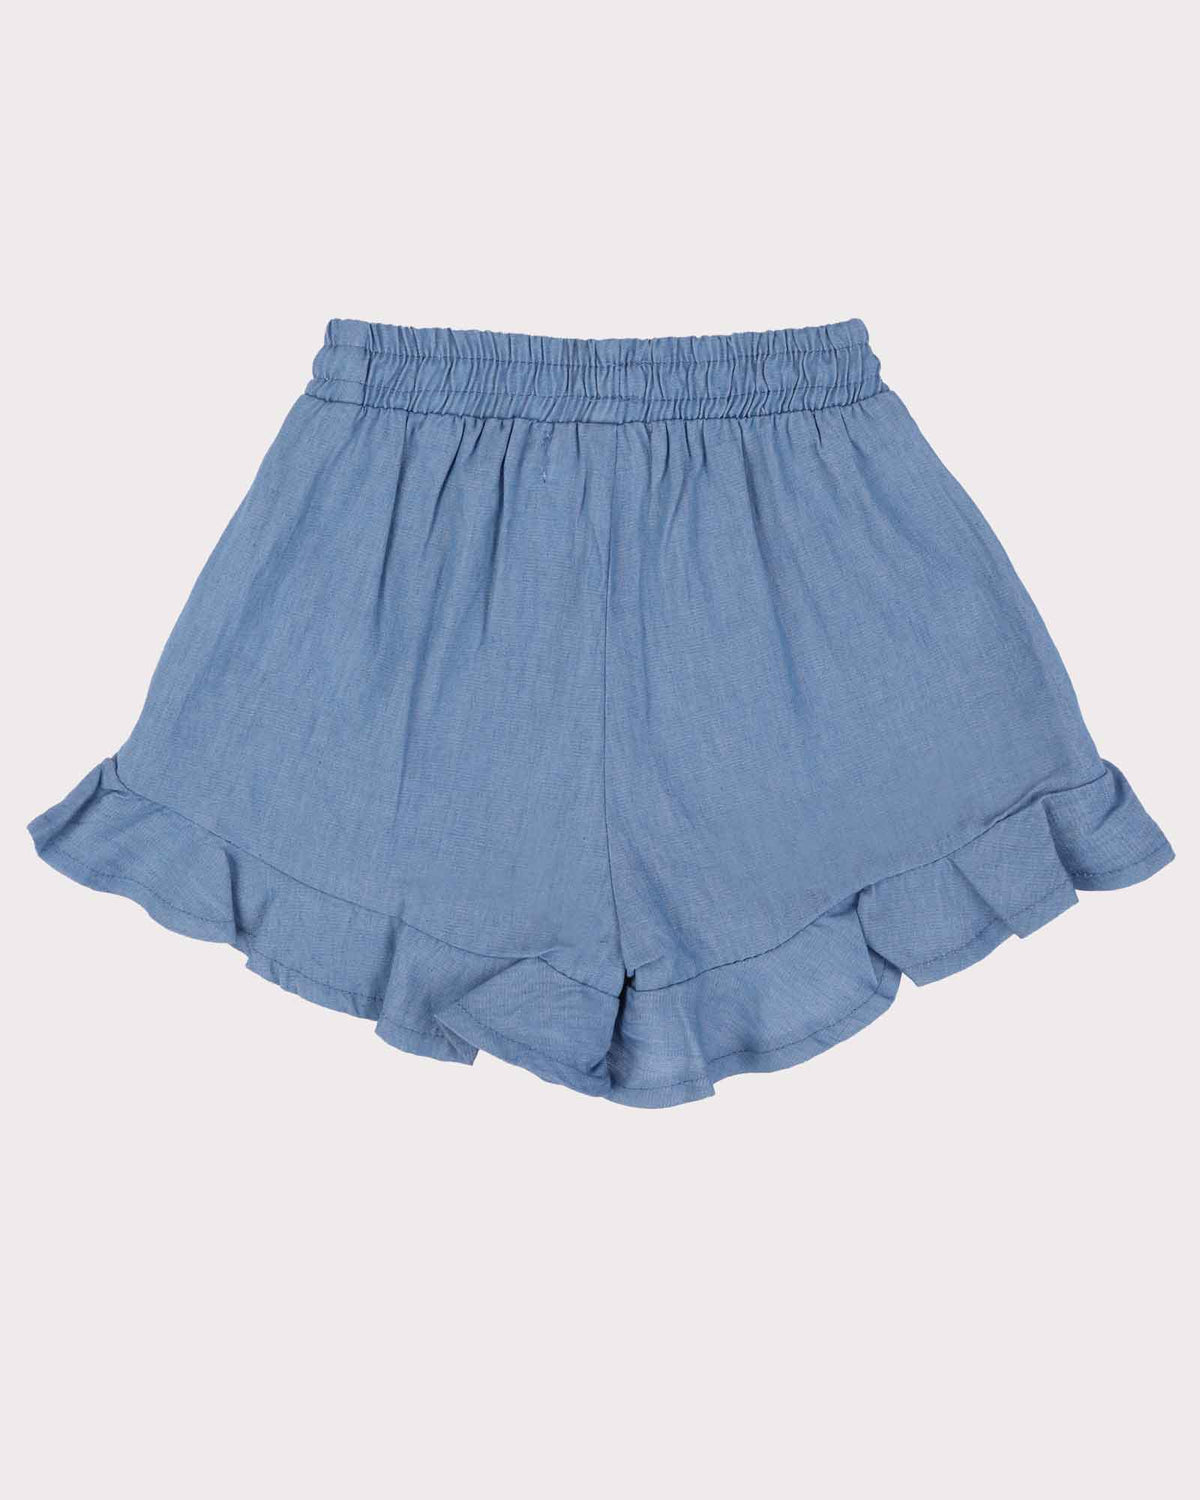 Frill Short in Chambray Back